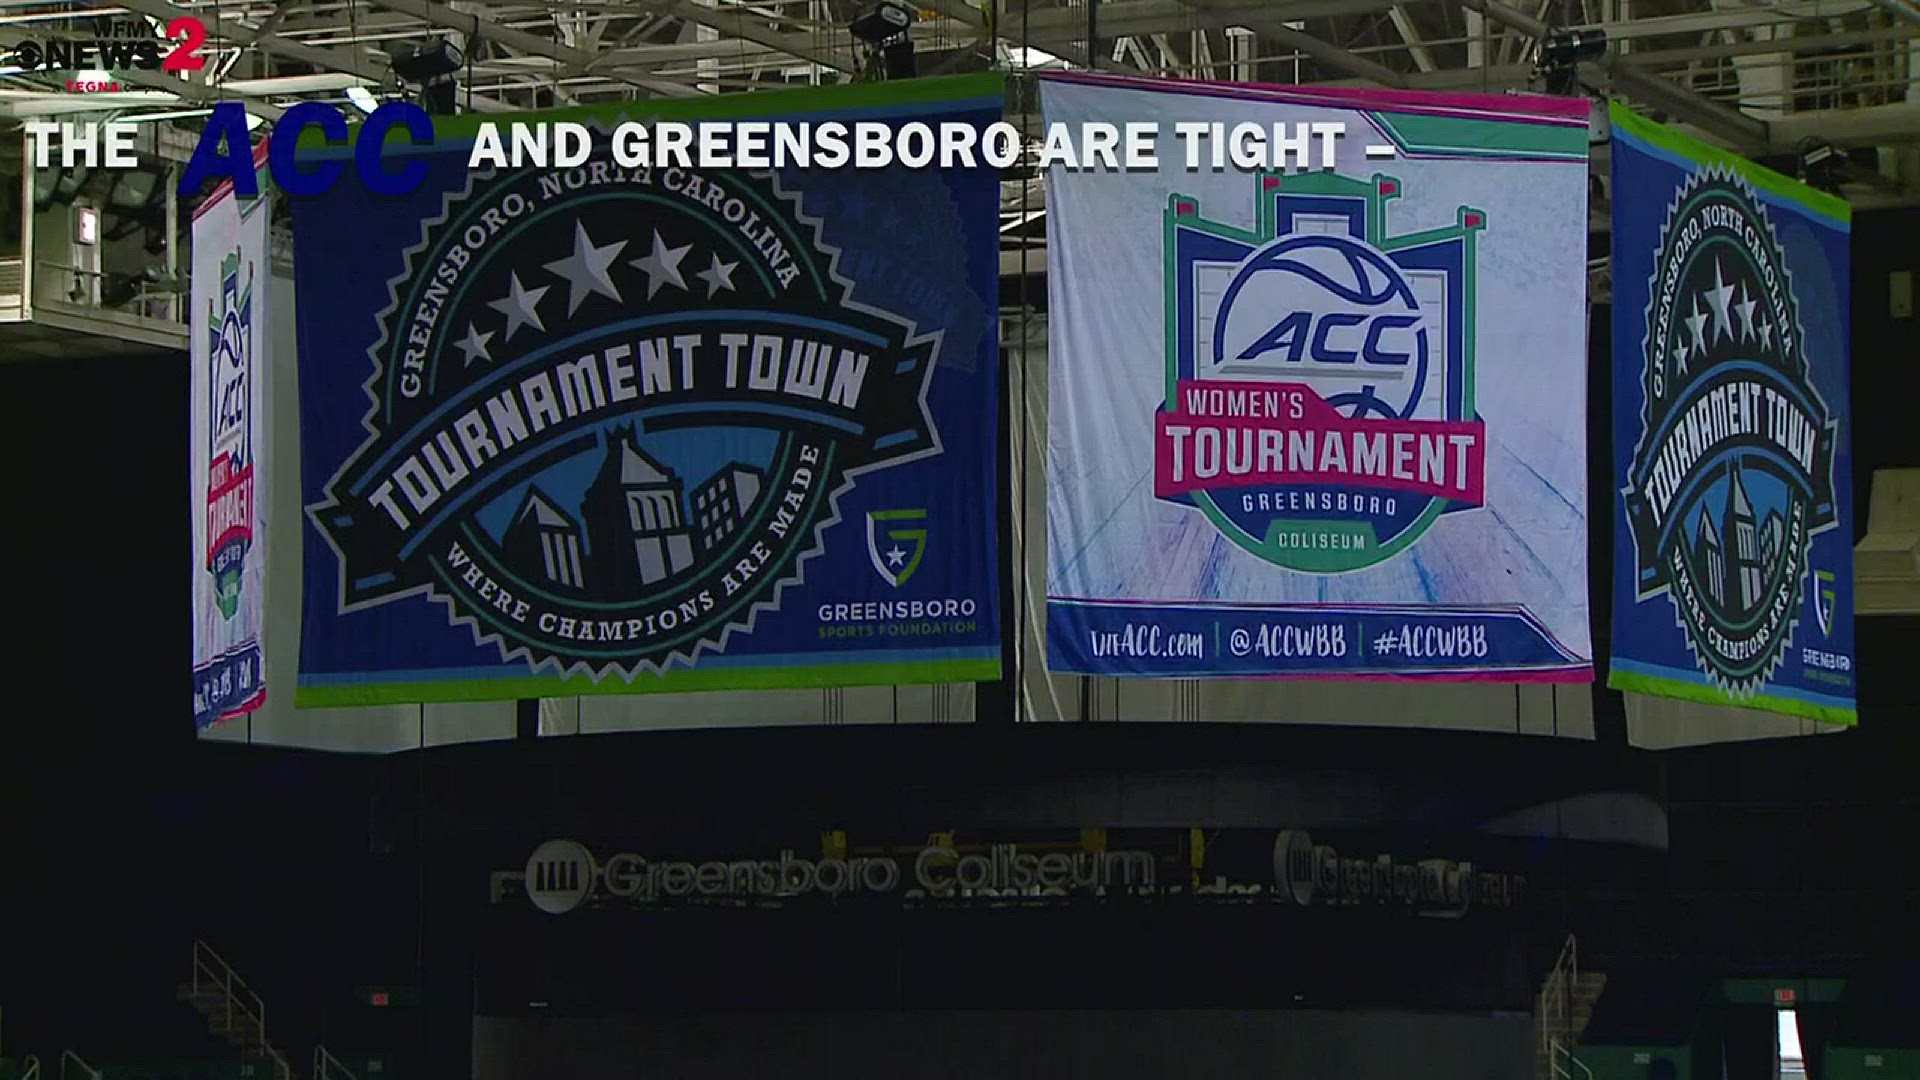 The Greensboro Coliseum reports that the Greensboro CVB estimates the economic impact of this year's Tournament to be $4,560,144.40.